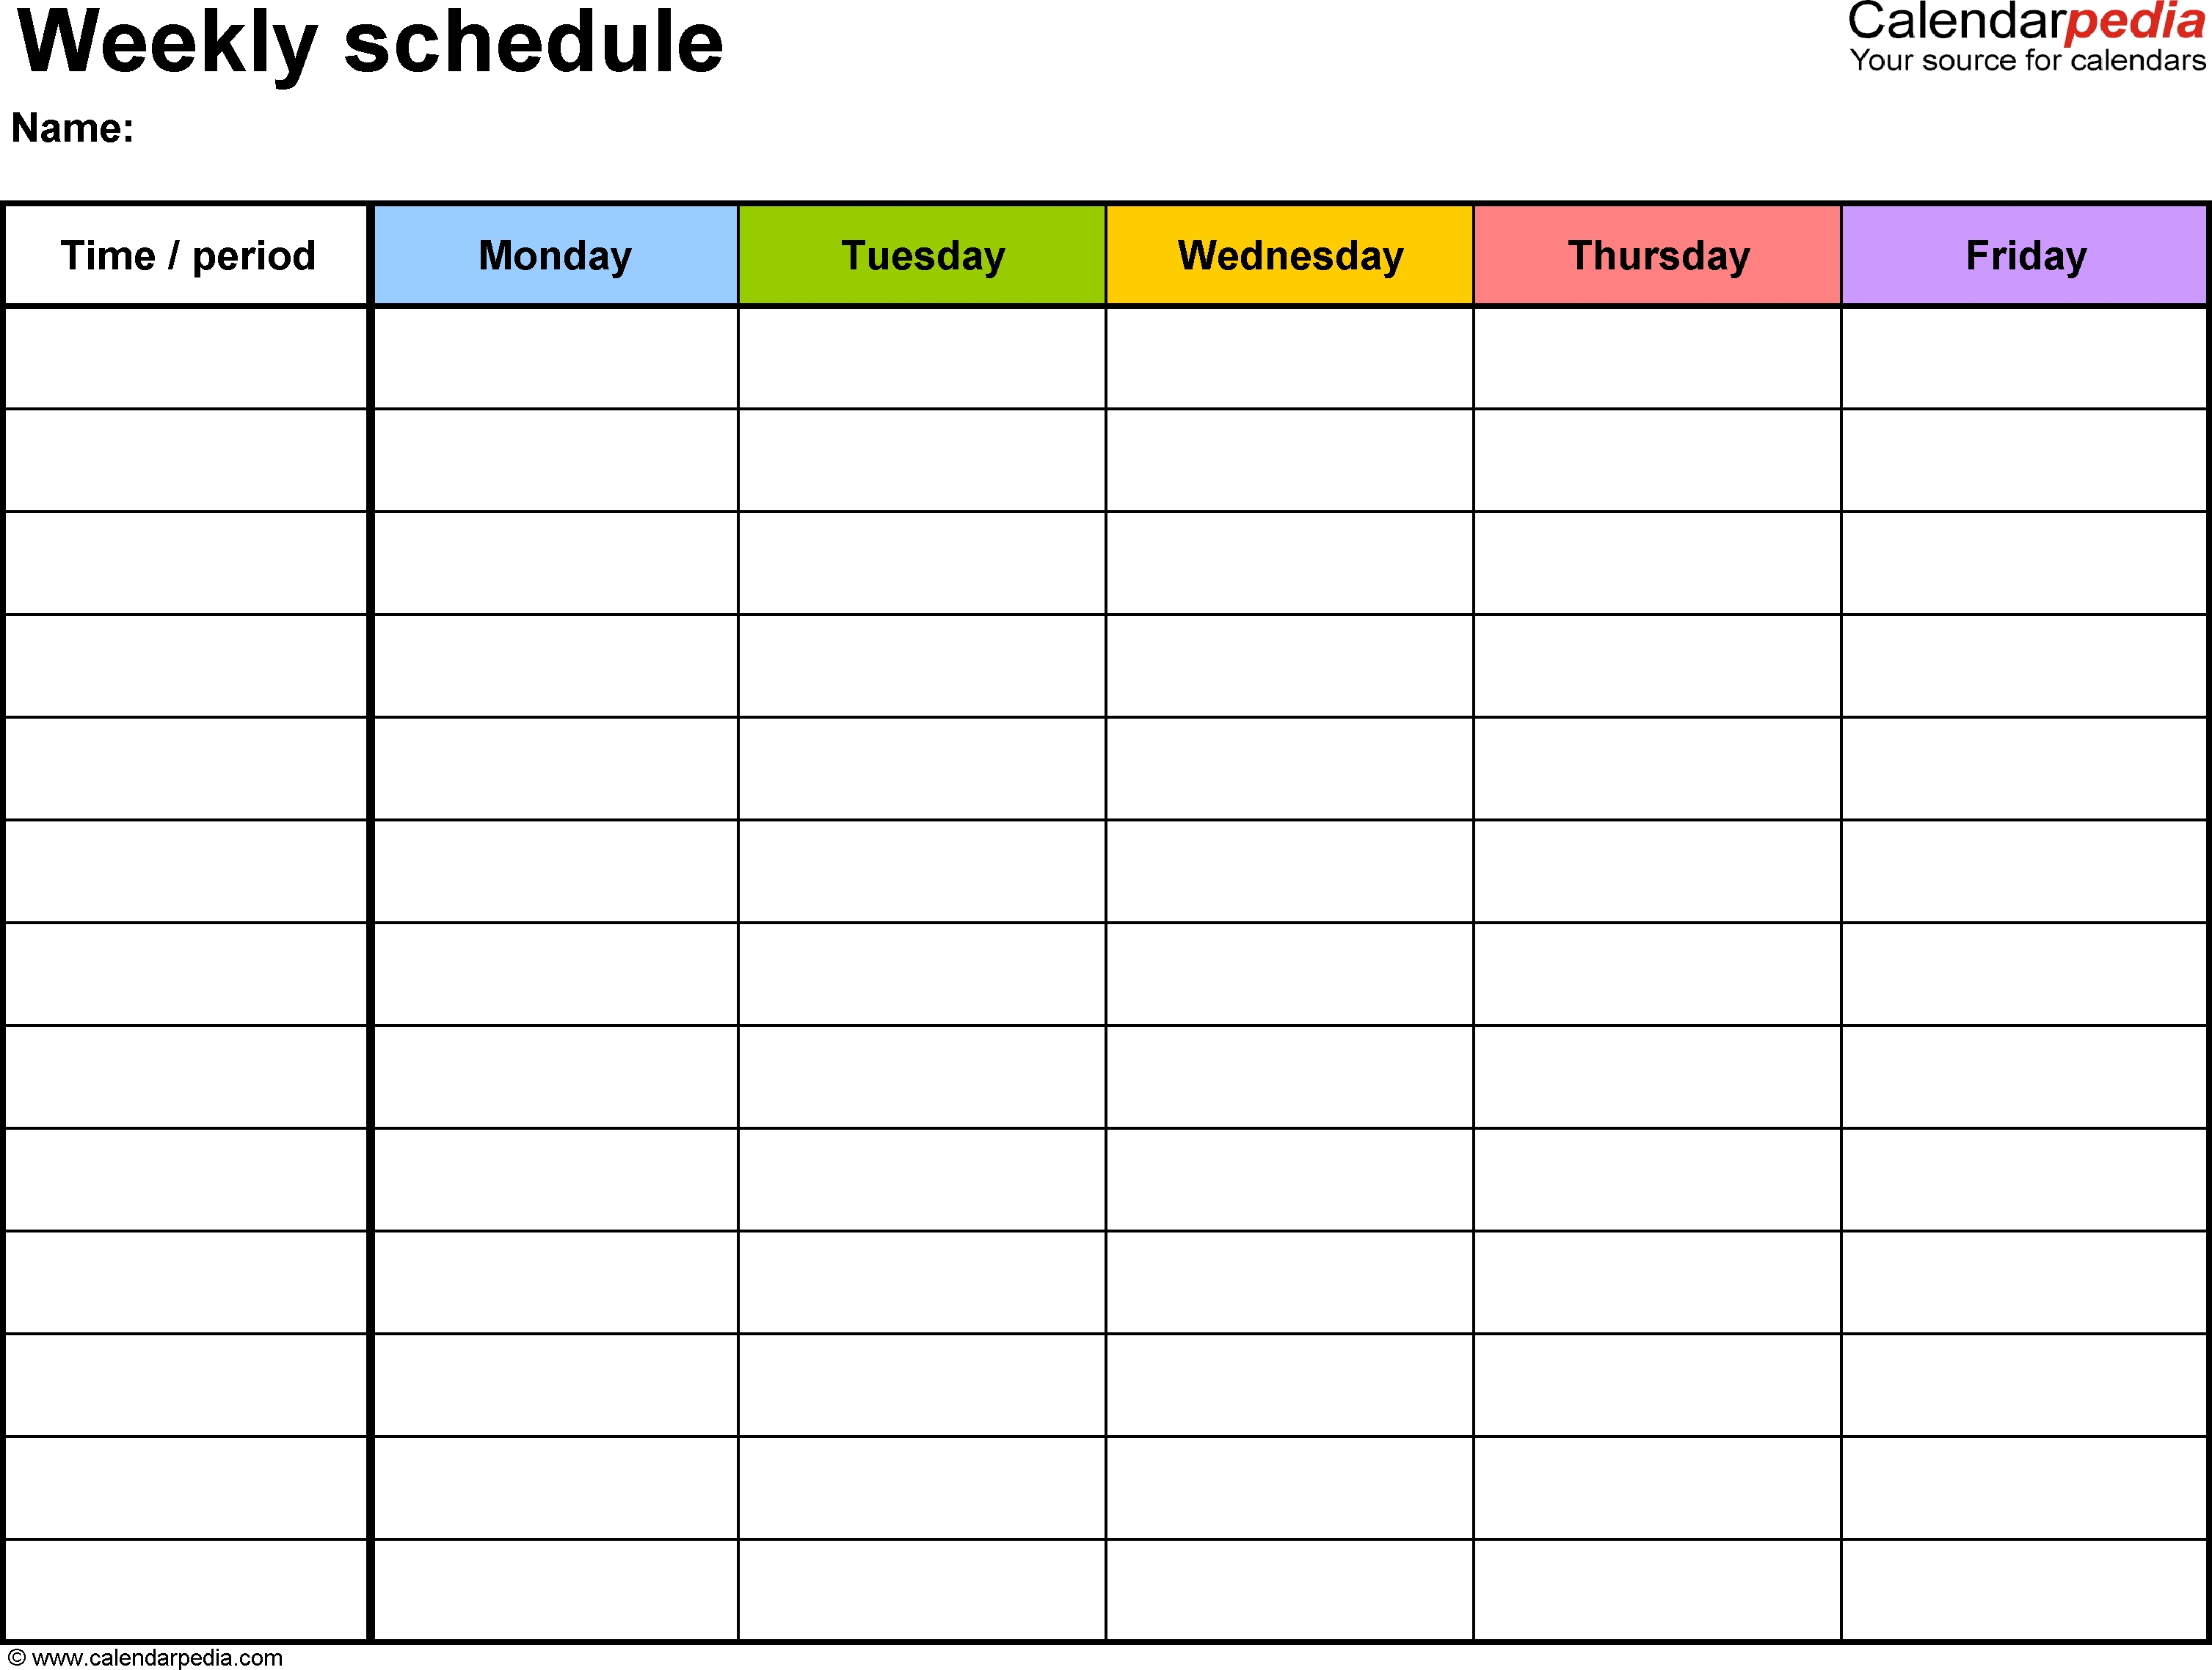 Free Weekly Schedule Templates For Word - 18 Templates throughout Blank Monday Through Friday Schedule